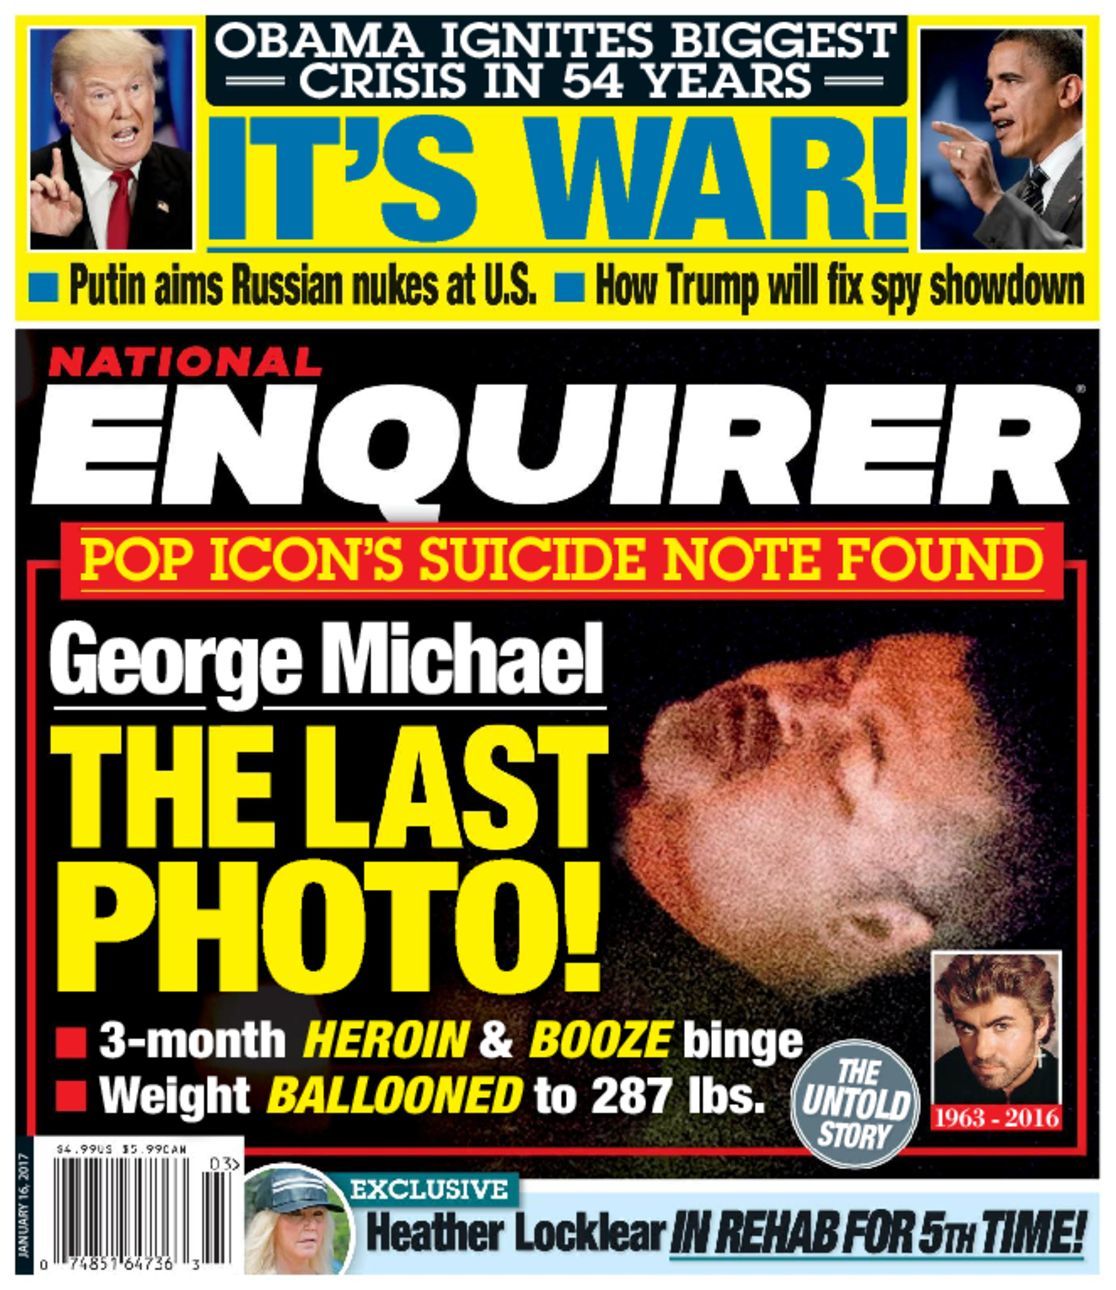 EXCLUSIVE COVER STORY: CHER DYING! | National Enquirer